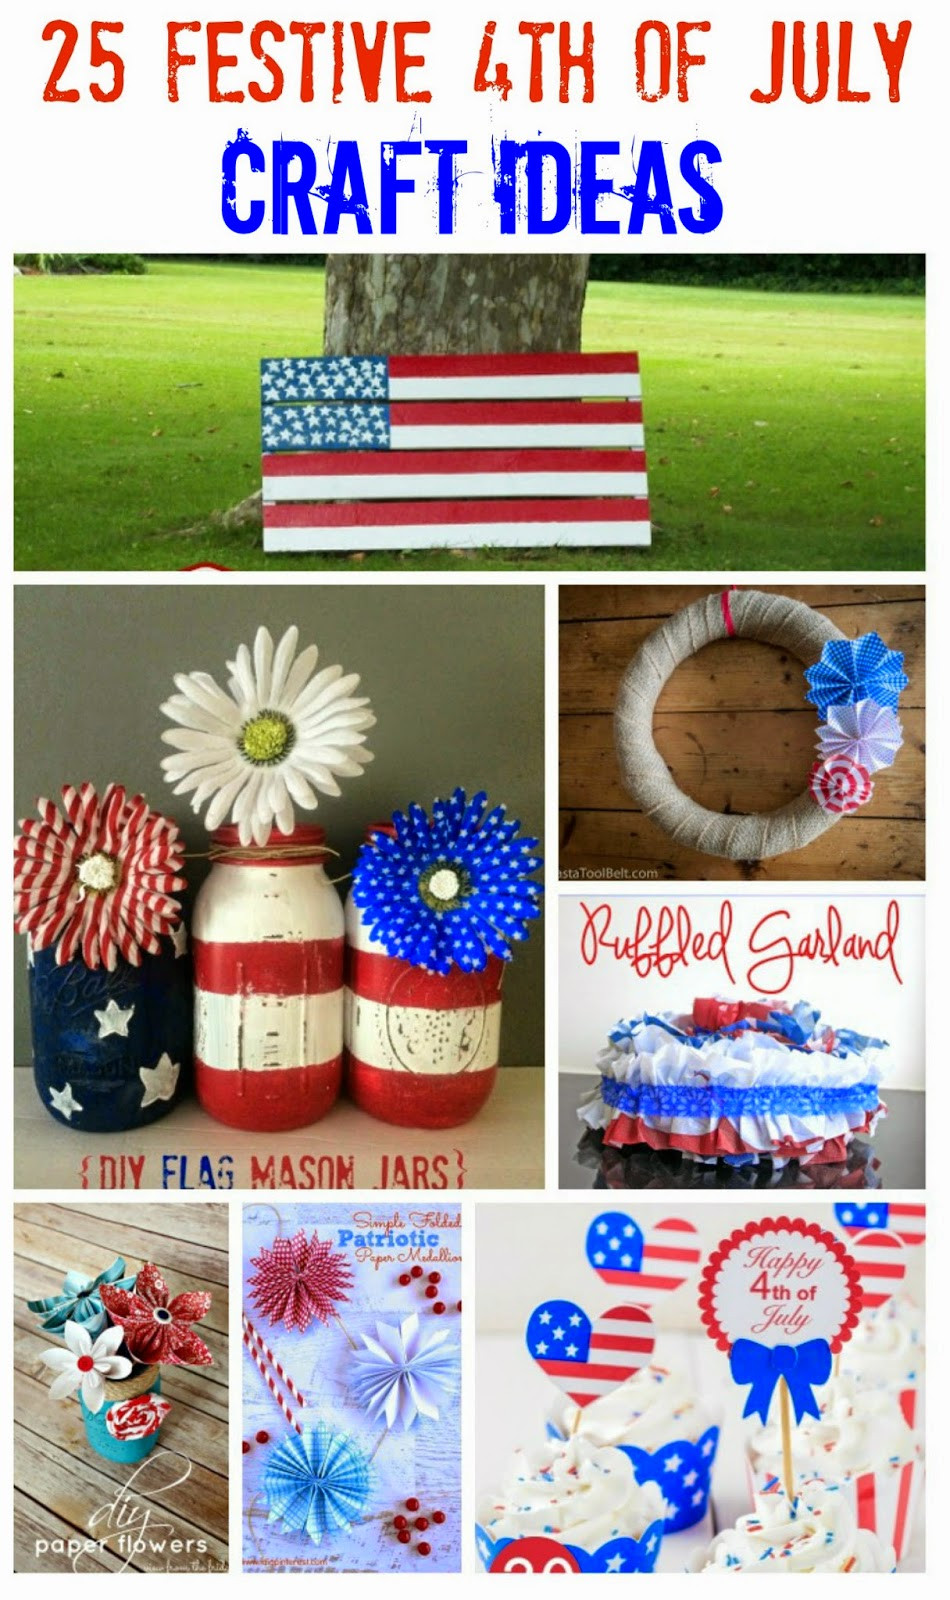 4th Of July Craft Ideas
 25 Festive 4th of July Craft Ideas Play Party Plan